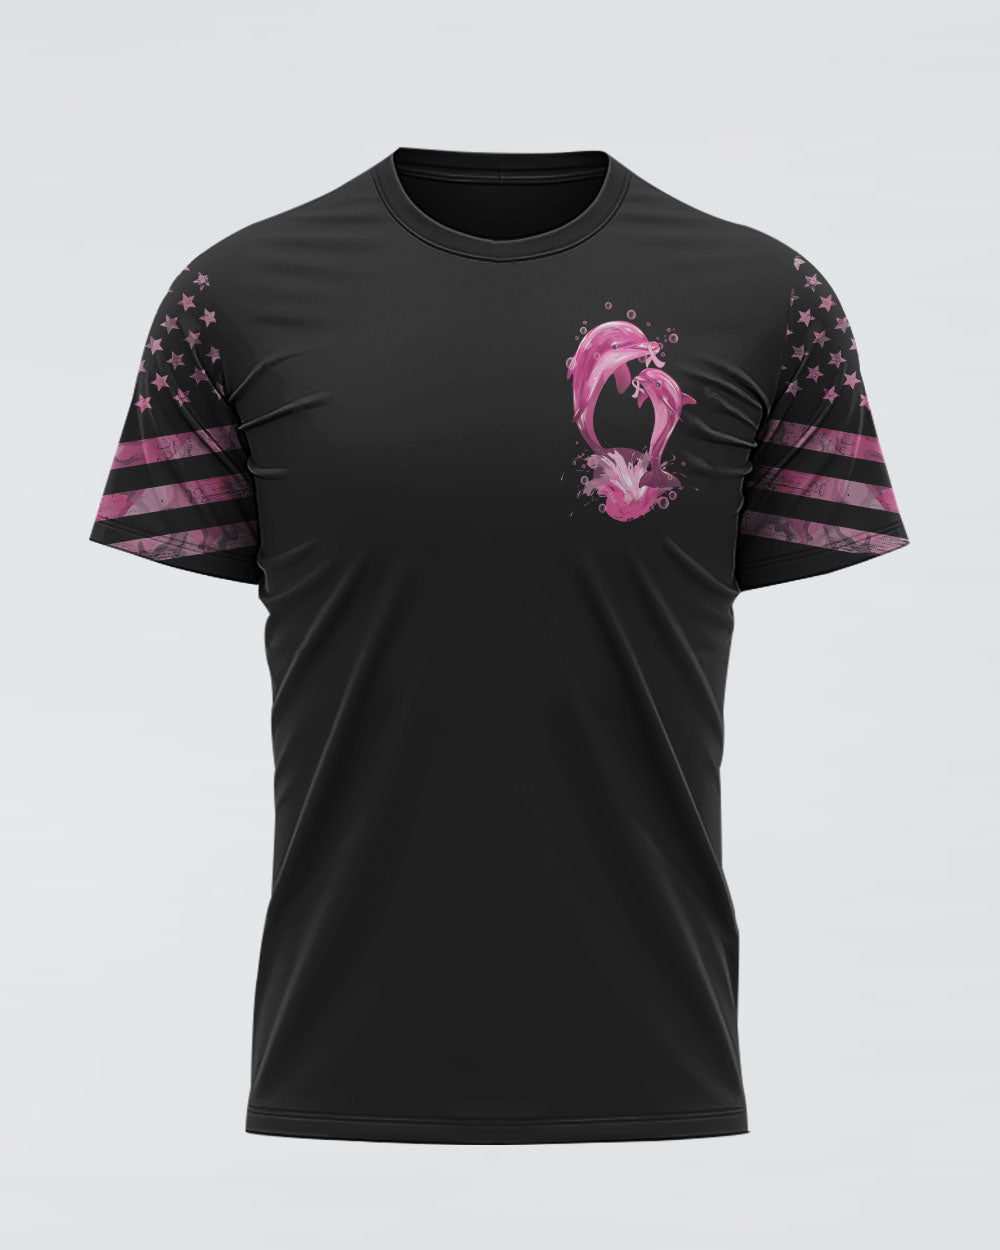 Fight Flag Dolphin Women's Breast Cancer Awareness Tshirt